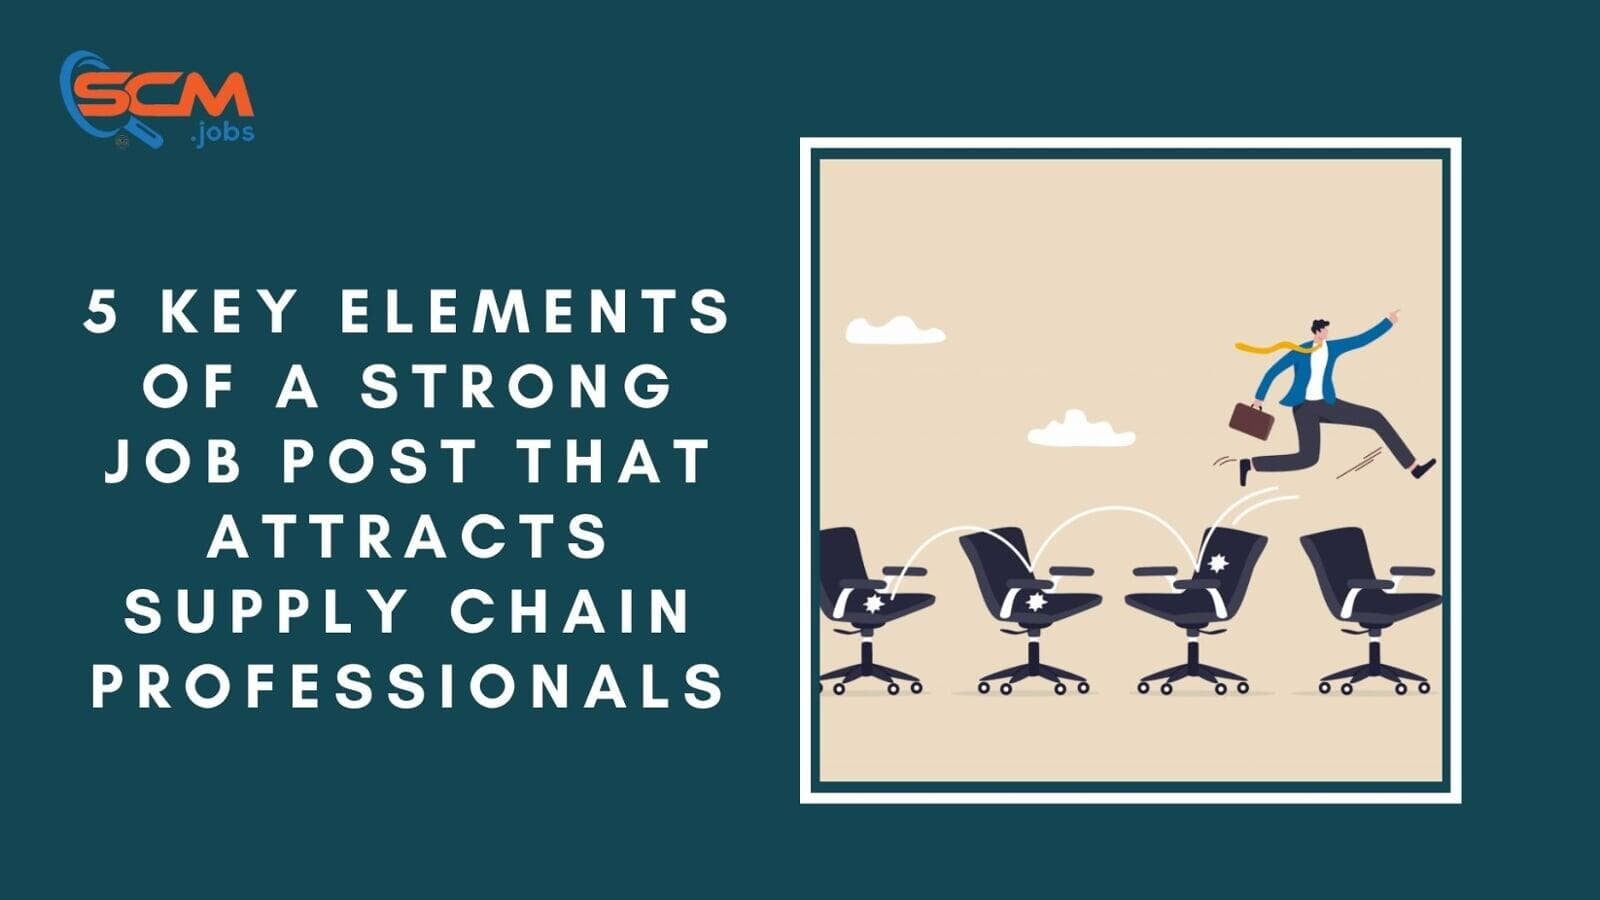 5 Key Elements of a Strong Job Post That Attracts Supply Chain Professionals